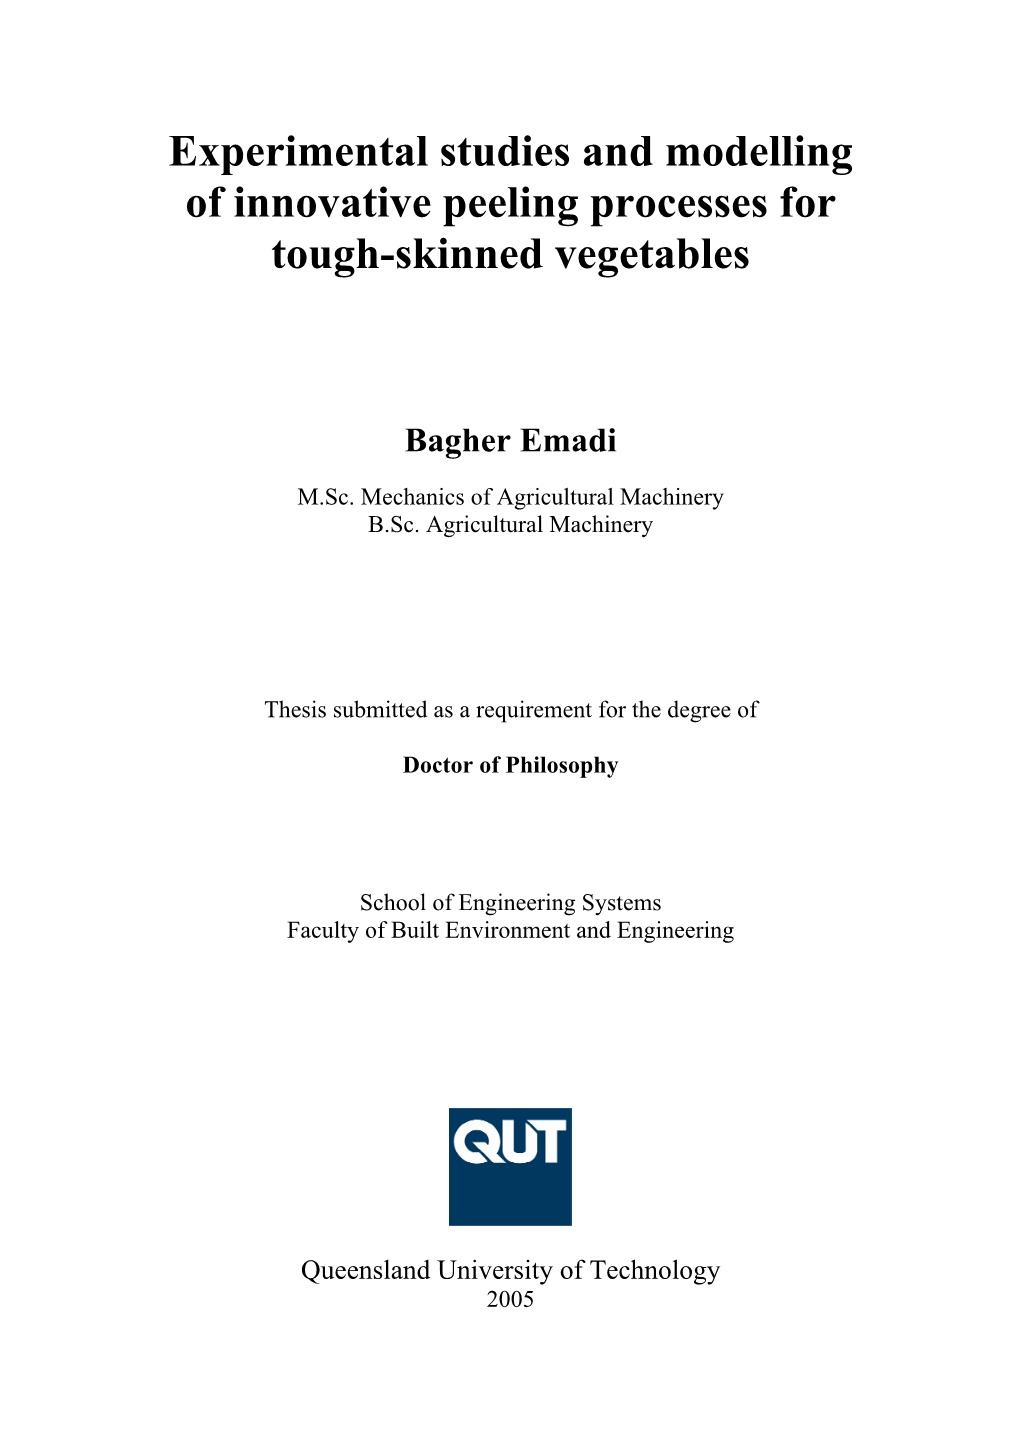 Experimental Studies and Modelling of Innovative Peeling Processes for Tough-Skinned Vegetables